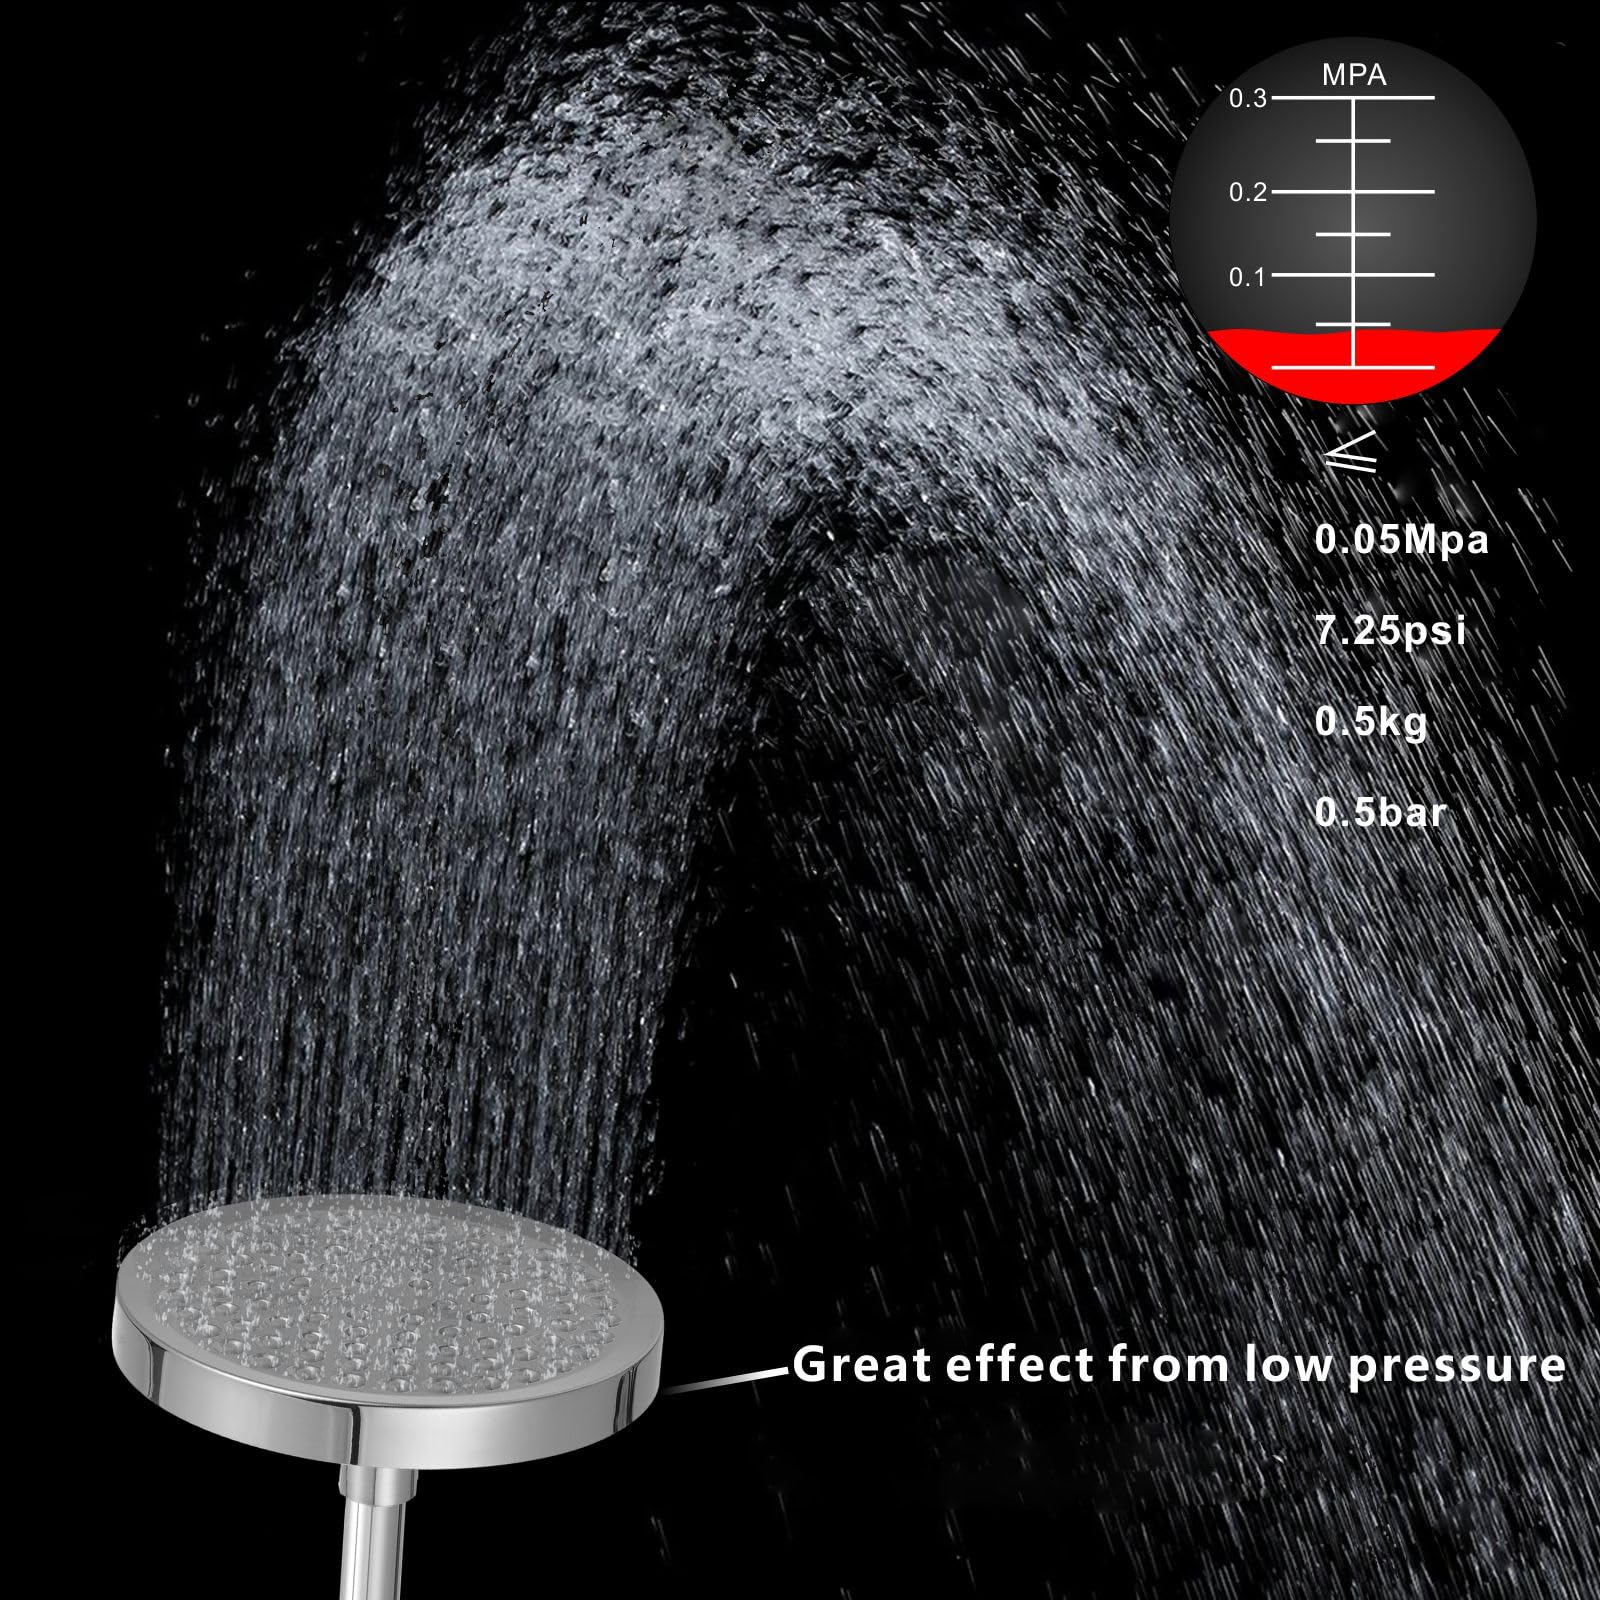 Voolan High Pressure Rain Shower Head - Luxury Modern Look - The Perfect Adjustable Replacement For Your Bathroom Showerhead - Comfortable Shower Experience Even at Low Water Flow (6“ Chrome)